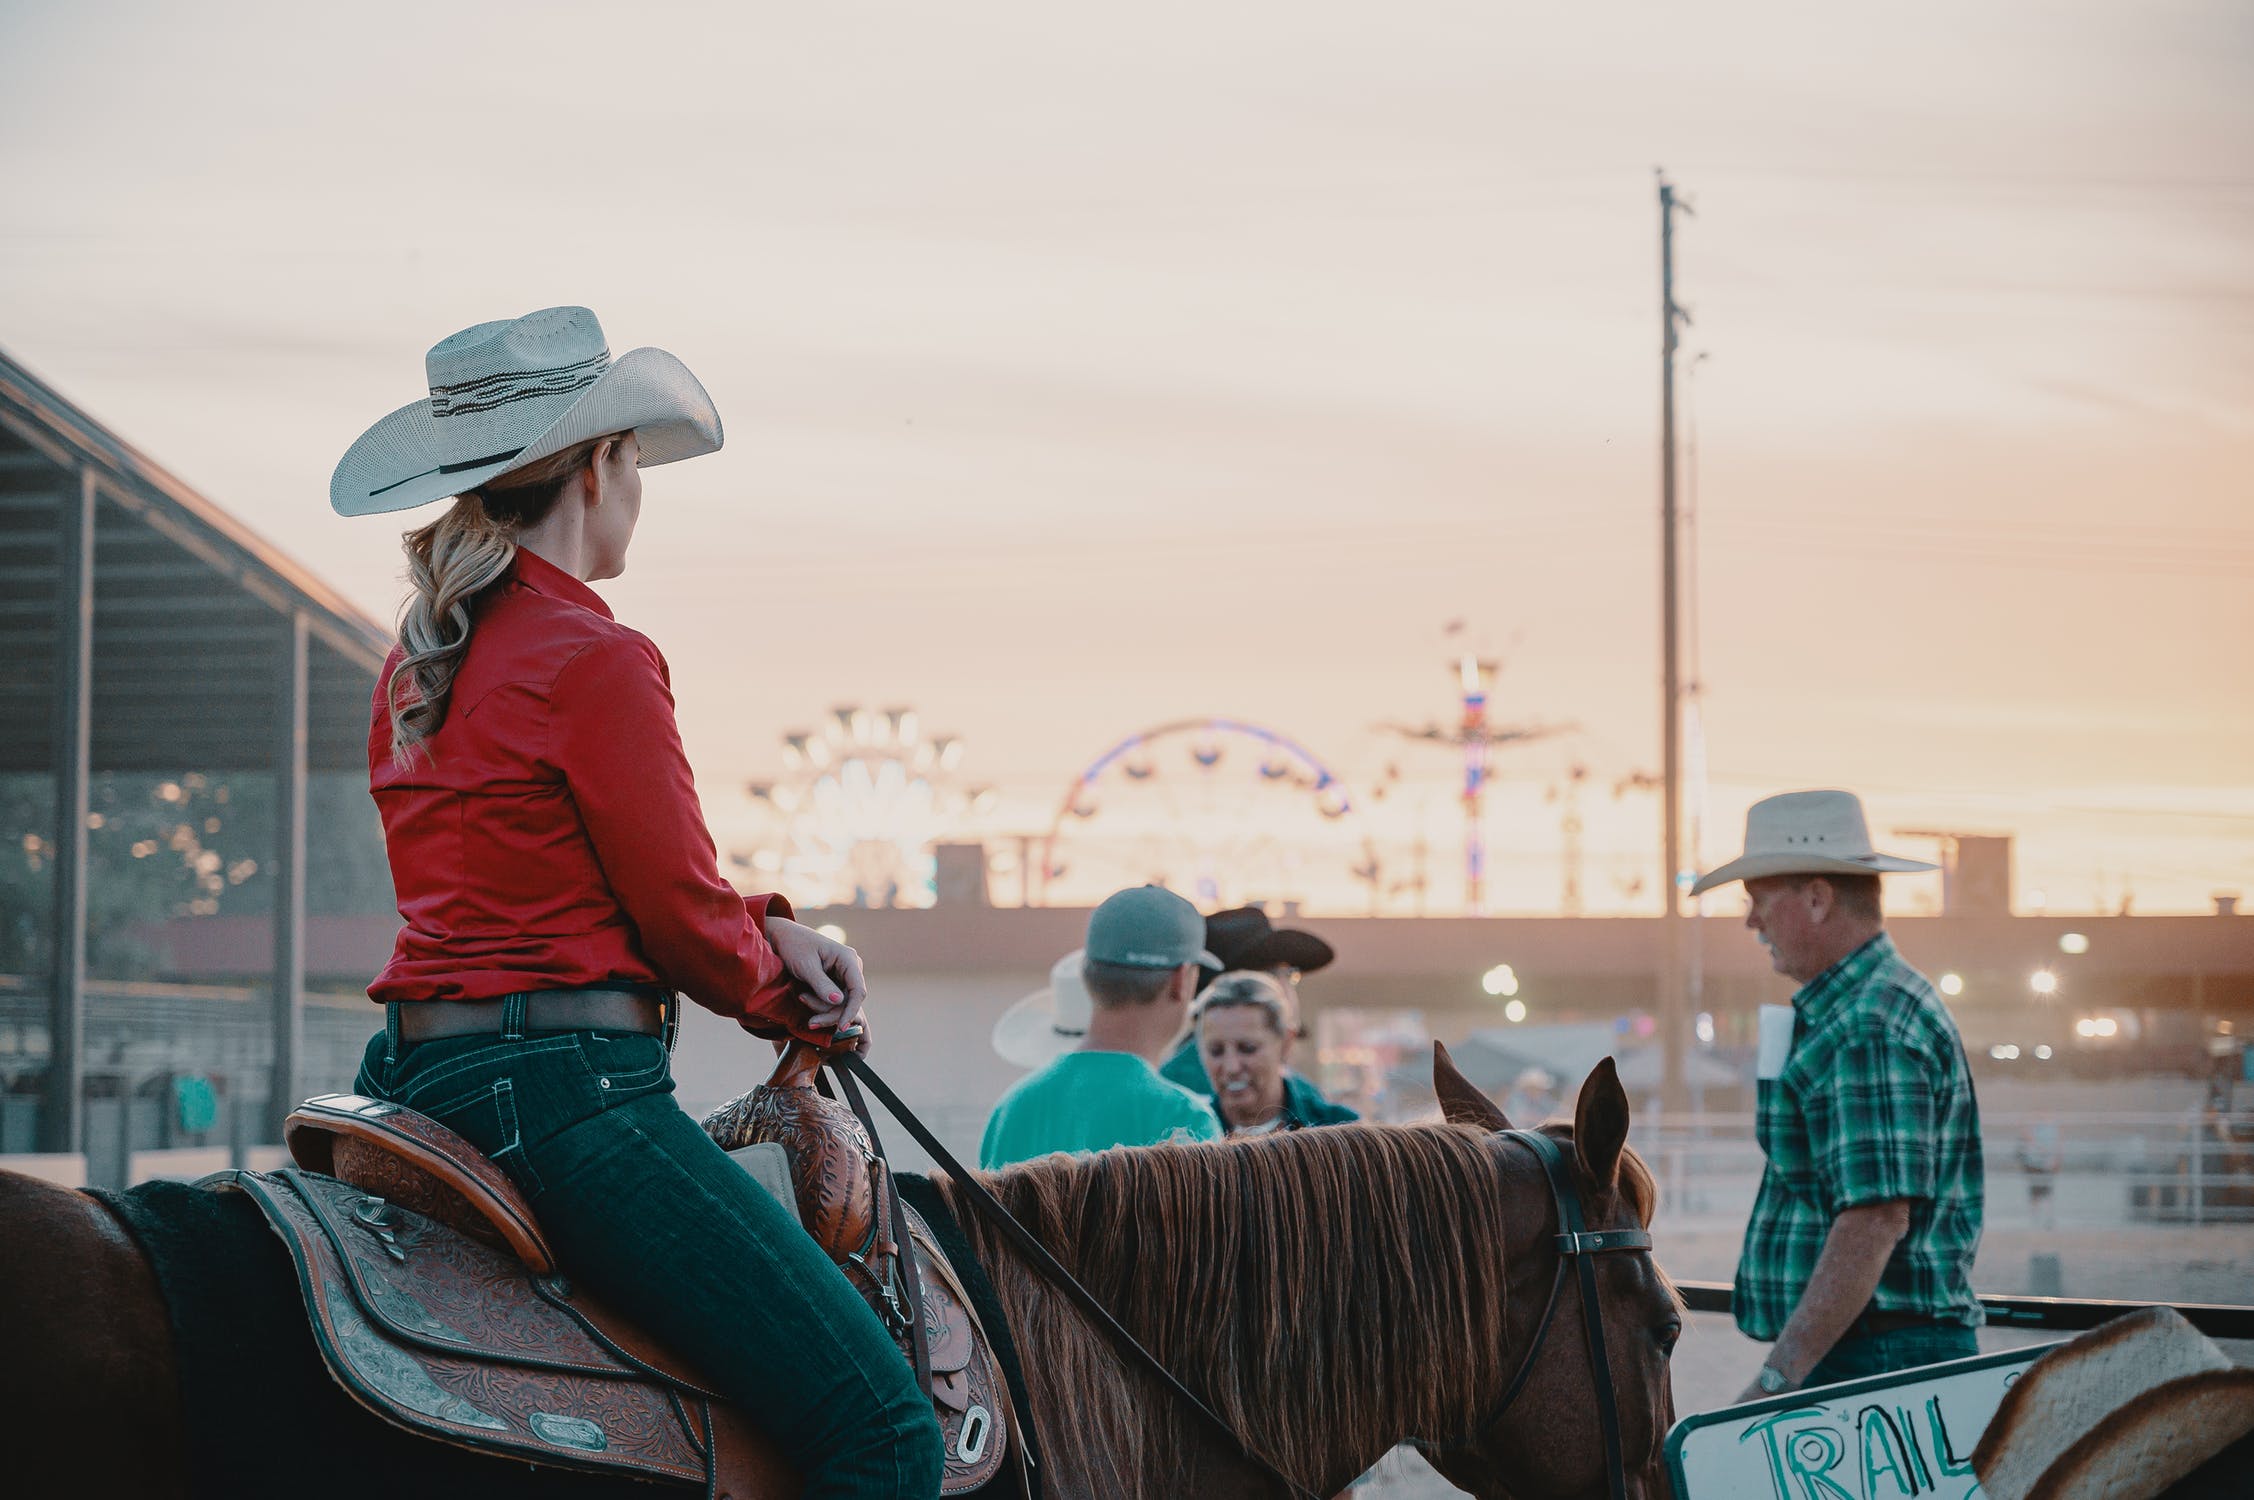 Girl riding horse at rodeo with carnival in the background.